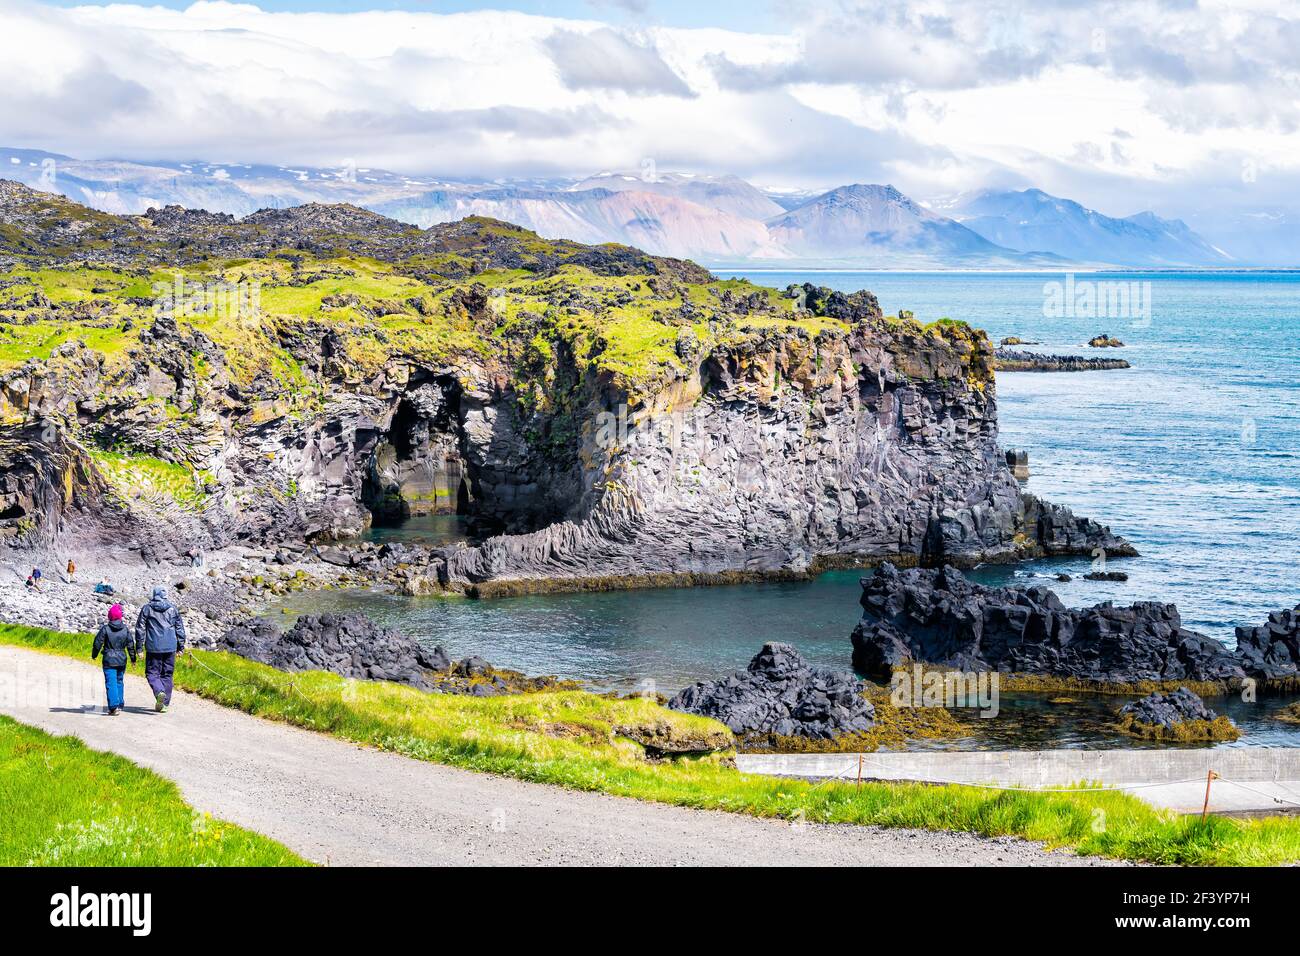 Snaefellsjokull, Iceland - June 18, 2018: Rocky formation in Hellnar National park Snaefellsnes Peninsula with ocean and cave cove people tourists on Stock Photo